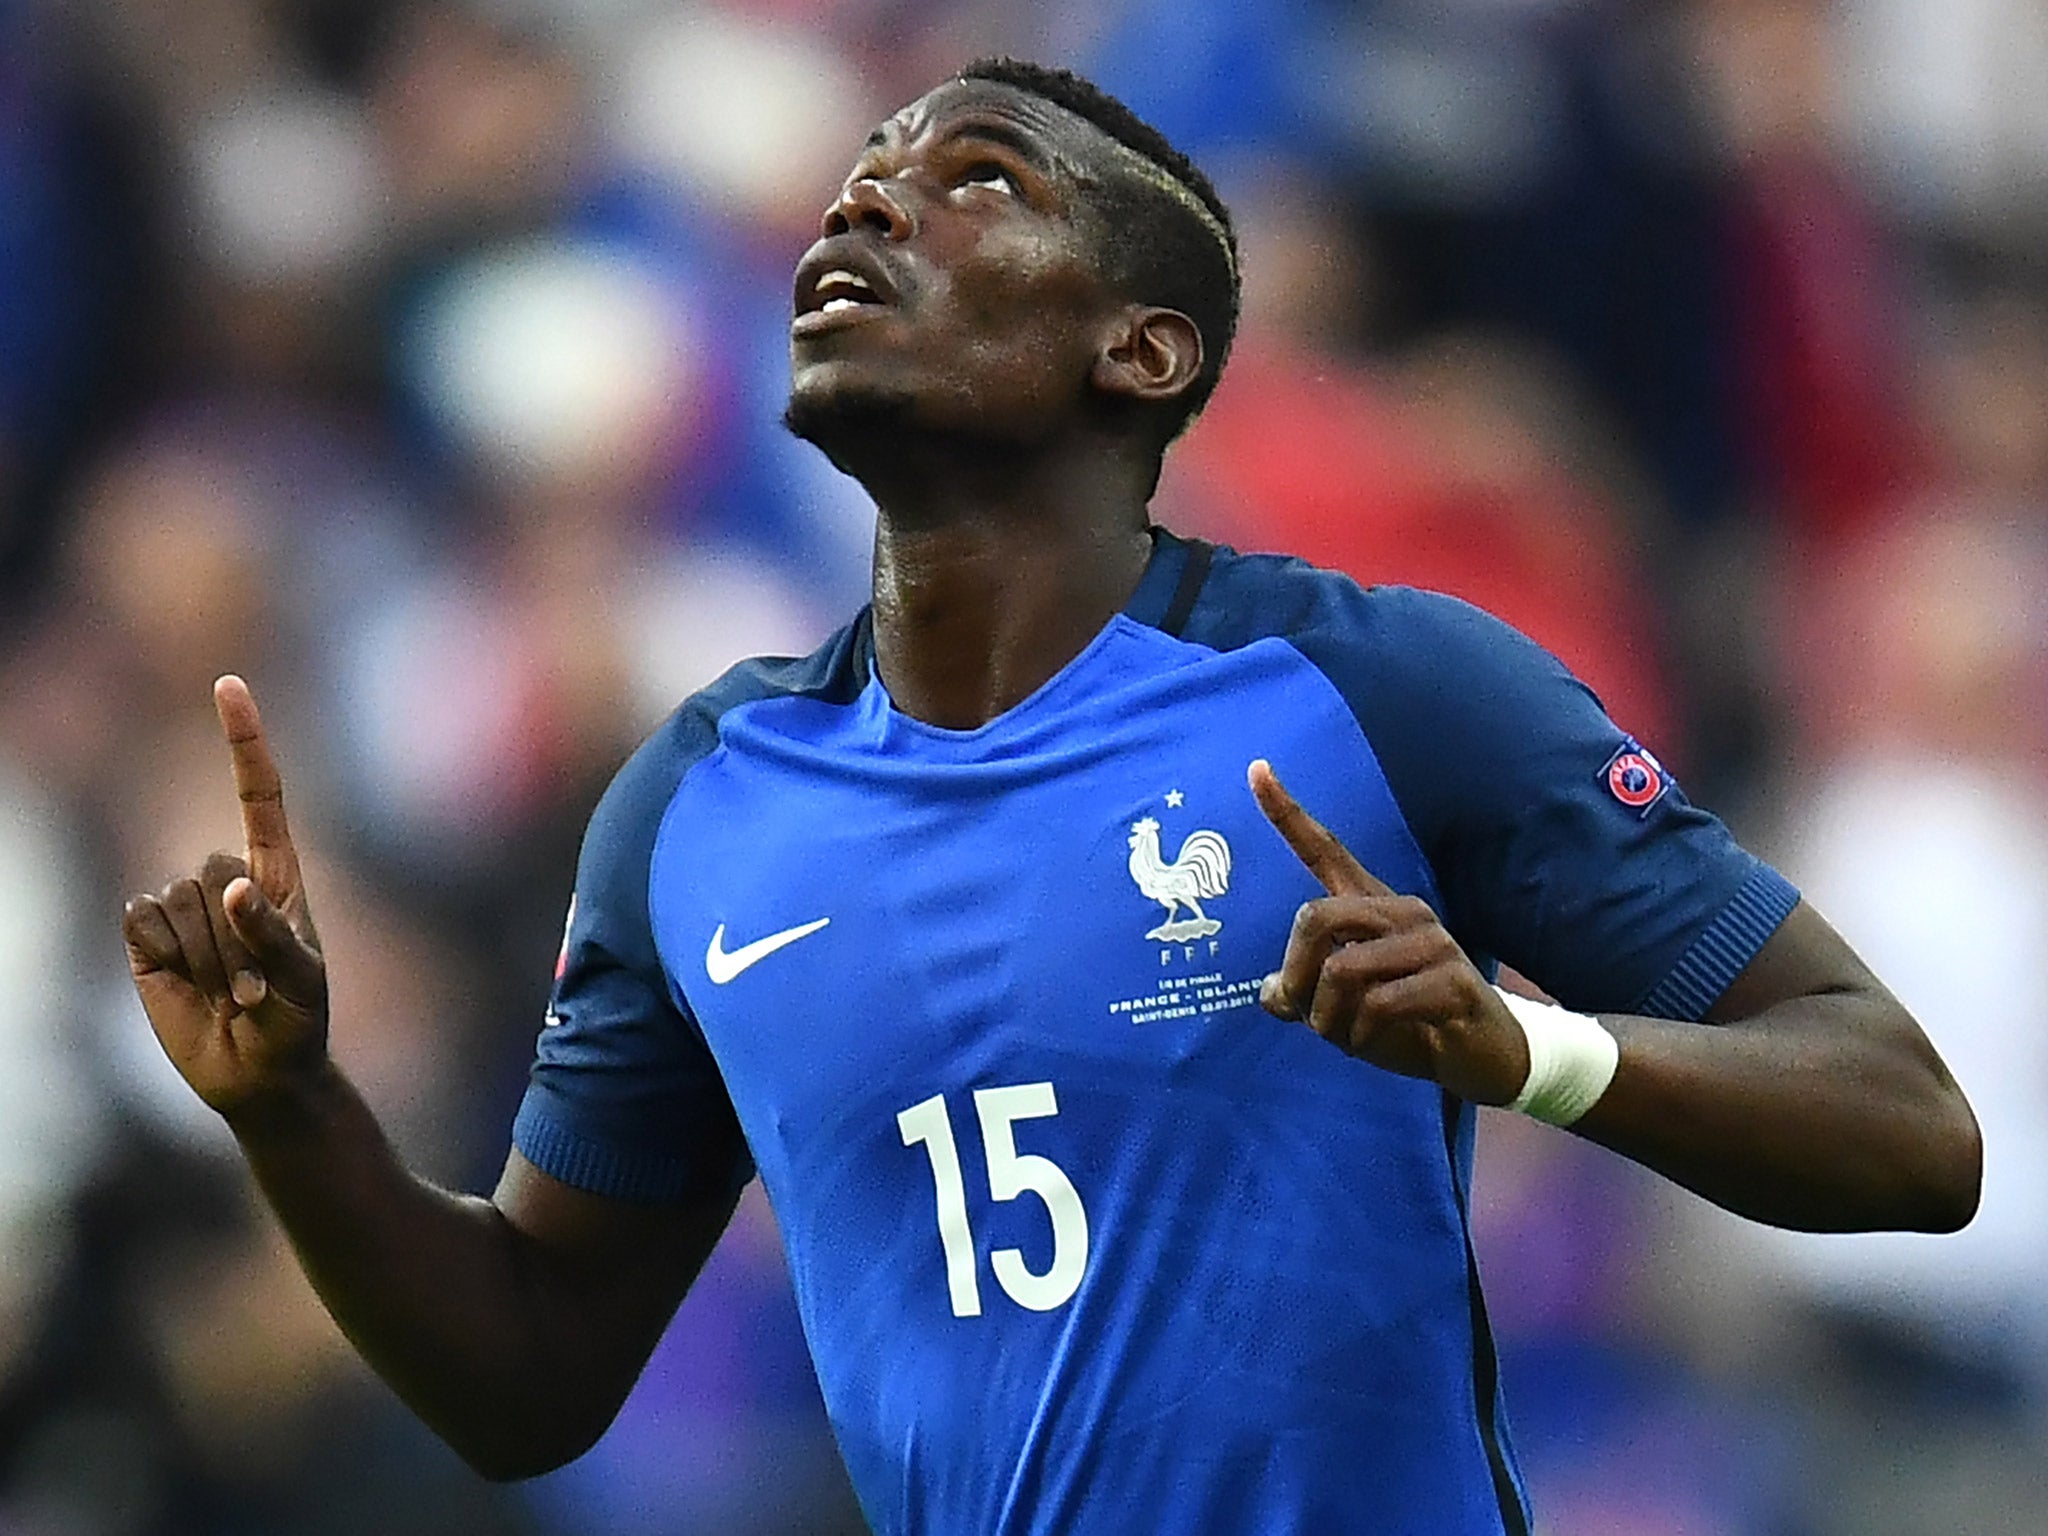 Paul Pogba is wanted by Manchester United but may require a world record transfer offer